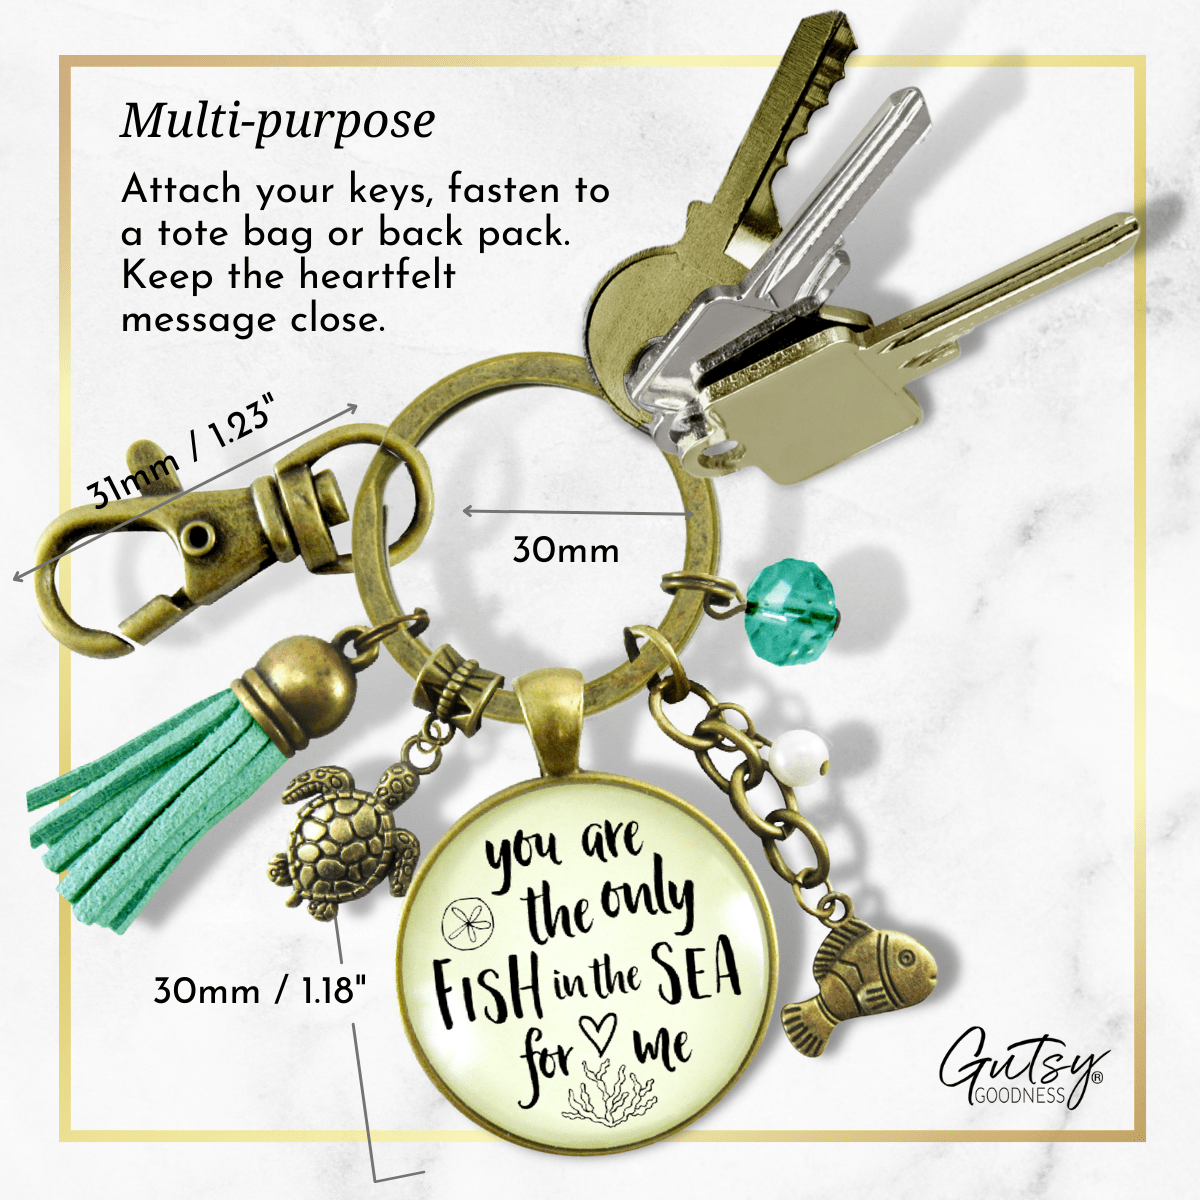 Romantic Beach Inspired Keychain You Are The Only Fish In The Sea Love Quote Tassel - Gutsy Goodness